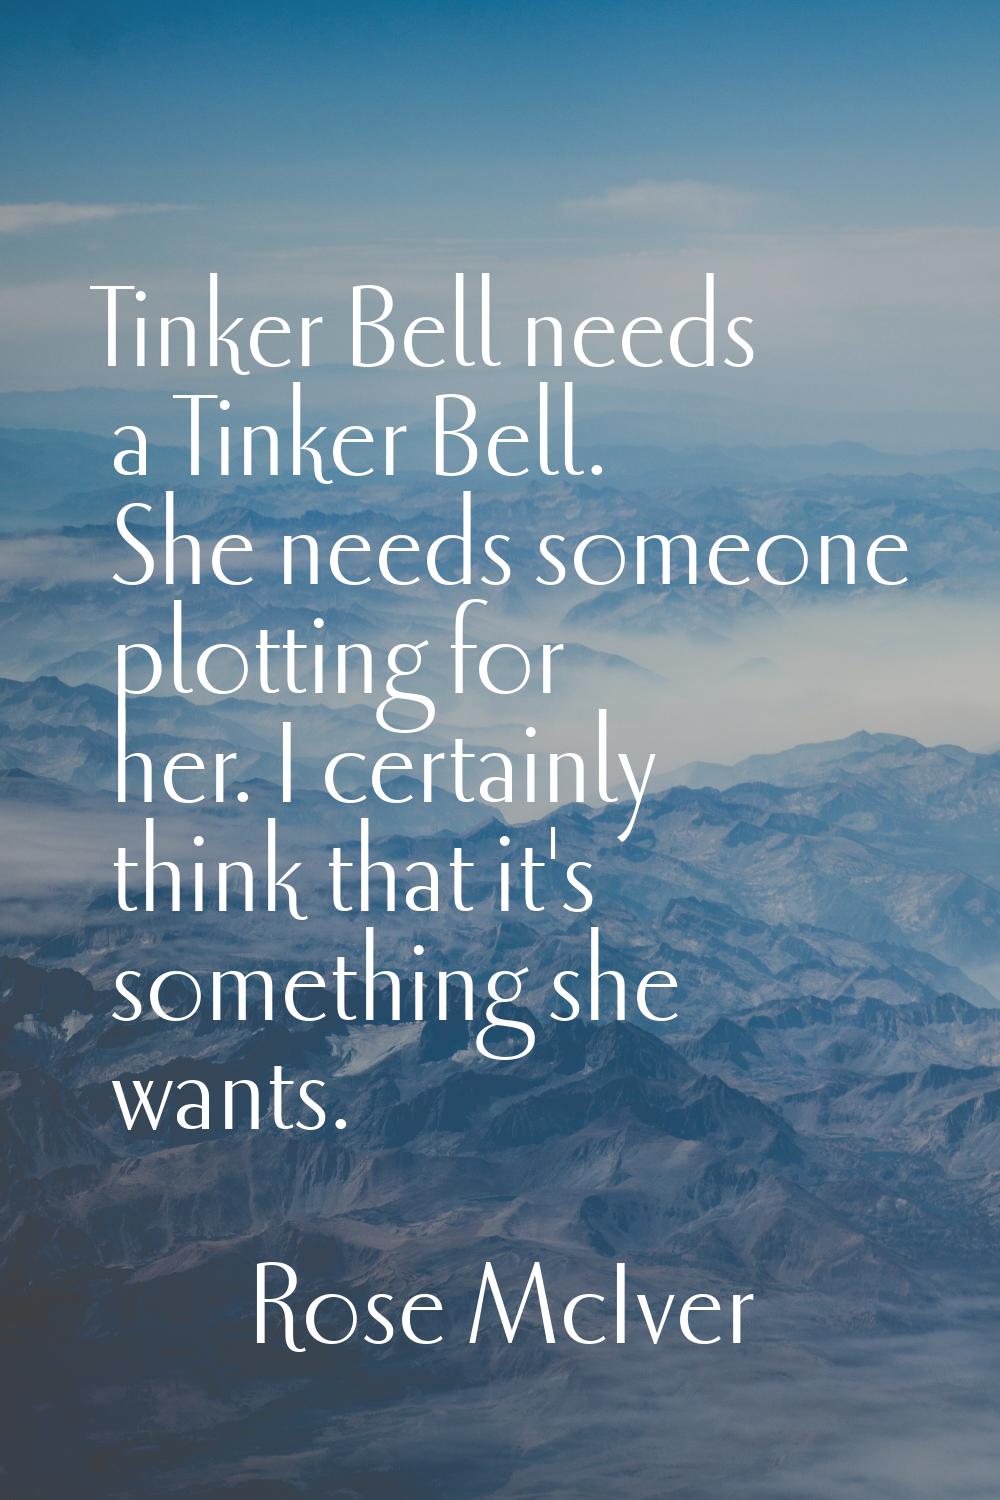 Tinker Bell needs a Tinker Bell. She needs someone plotting for her. I certainly think that it's so